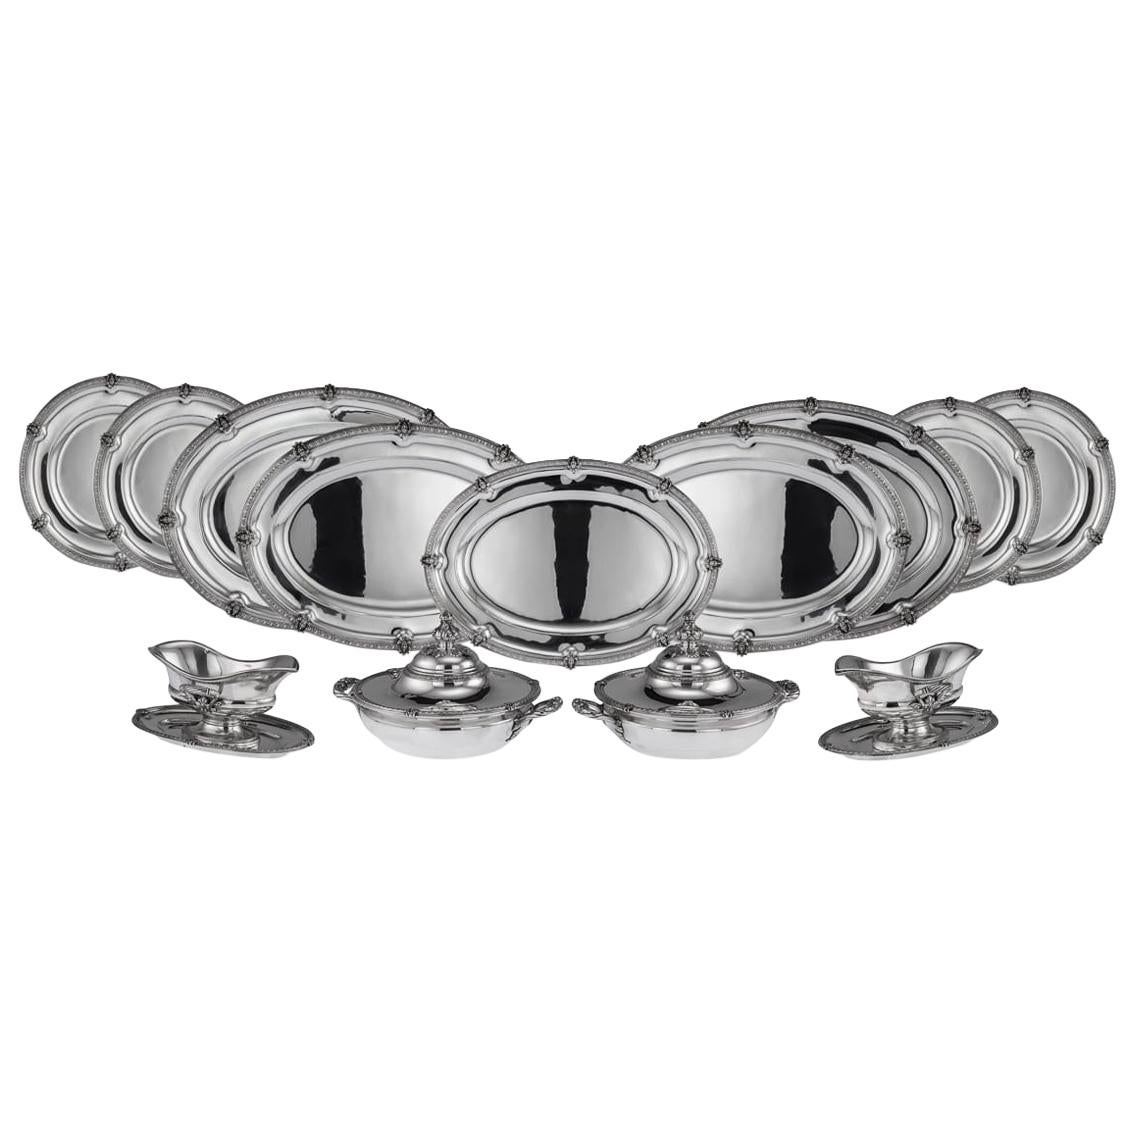 French Solid Silver Large Dinner Service, Mon Odiot, Paris, circa 1890